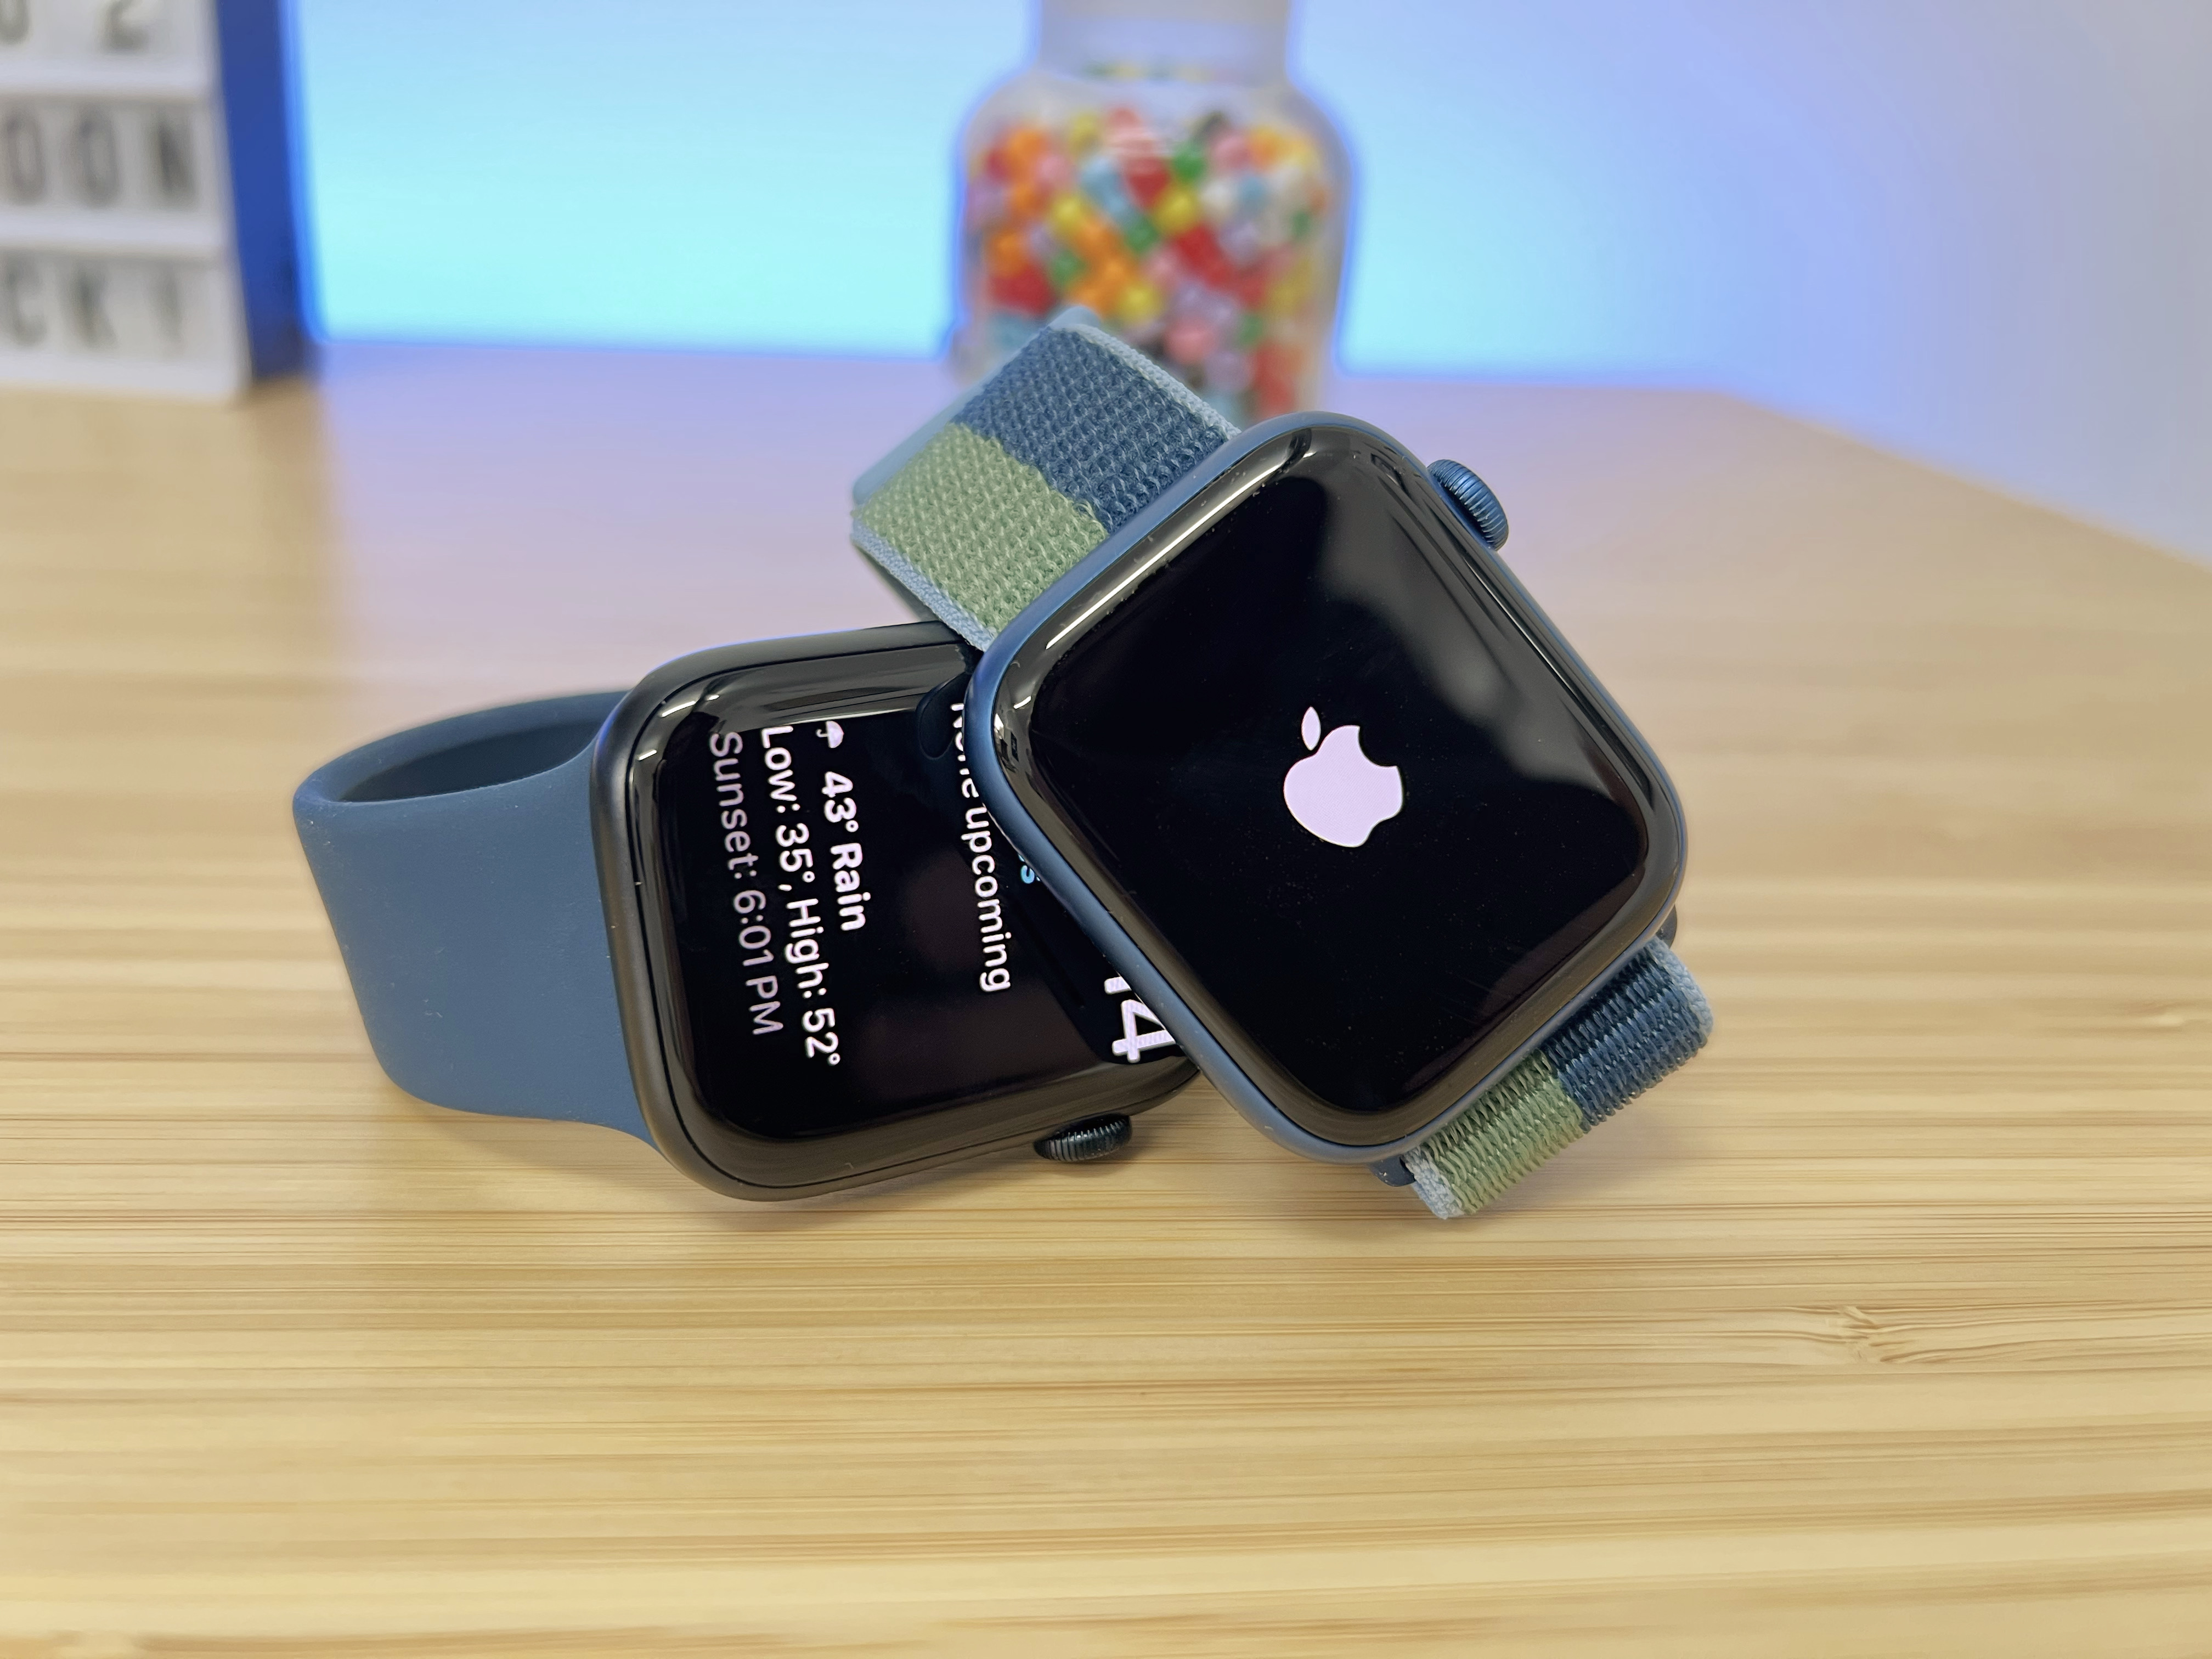 Apple Watch Series 7 review: Bigger really is better